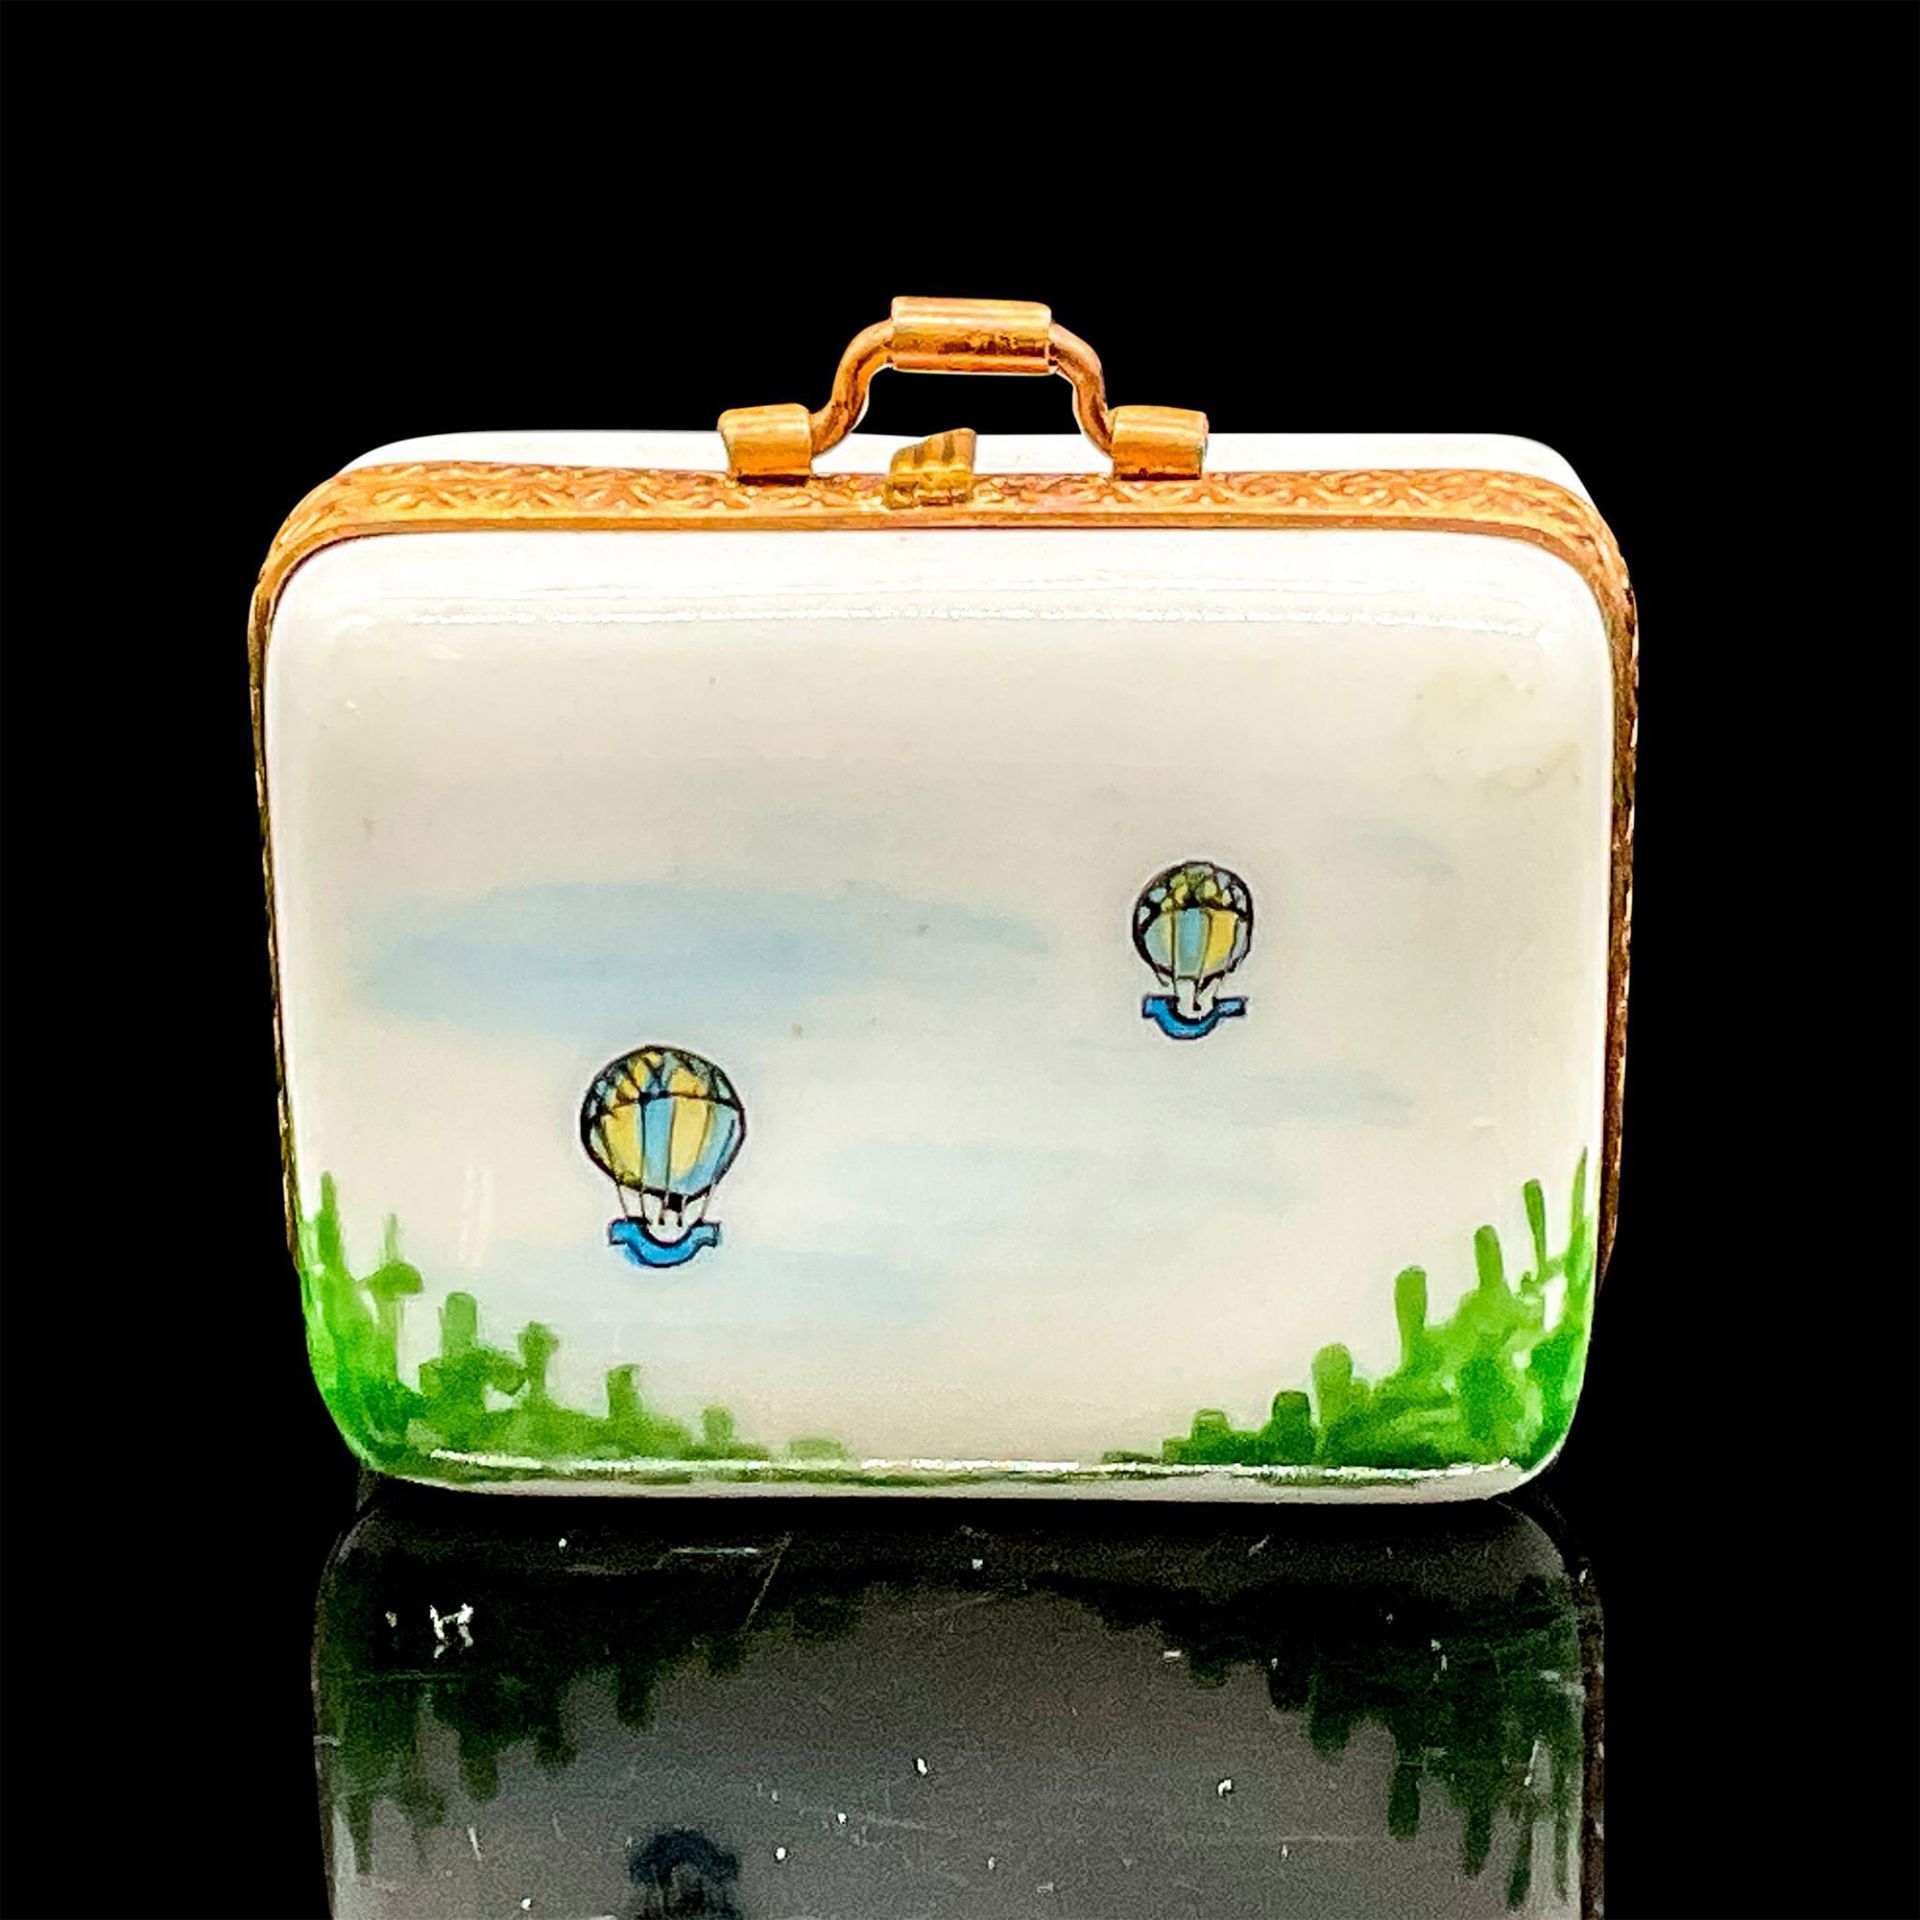 Limoges Porcelain Hand Painted Box, Case with Balloons - Image 3 of 3